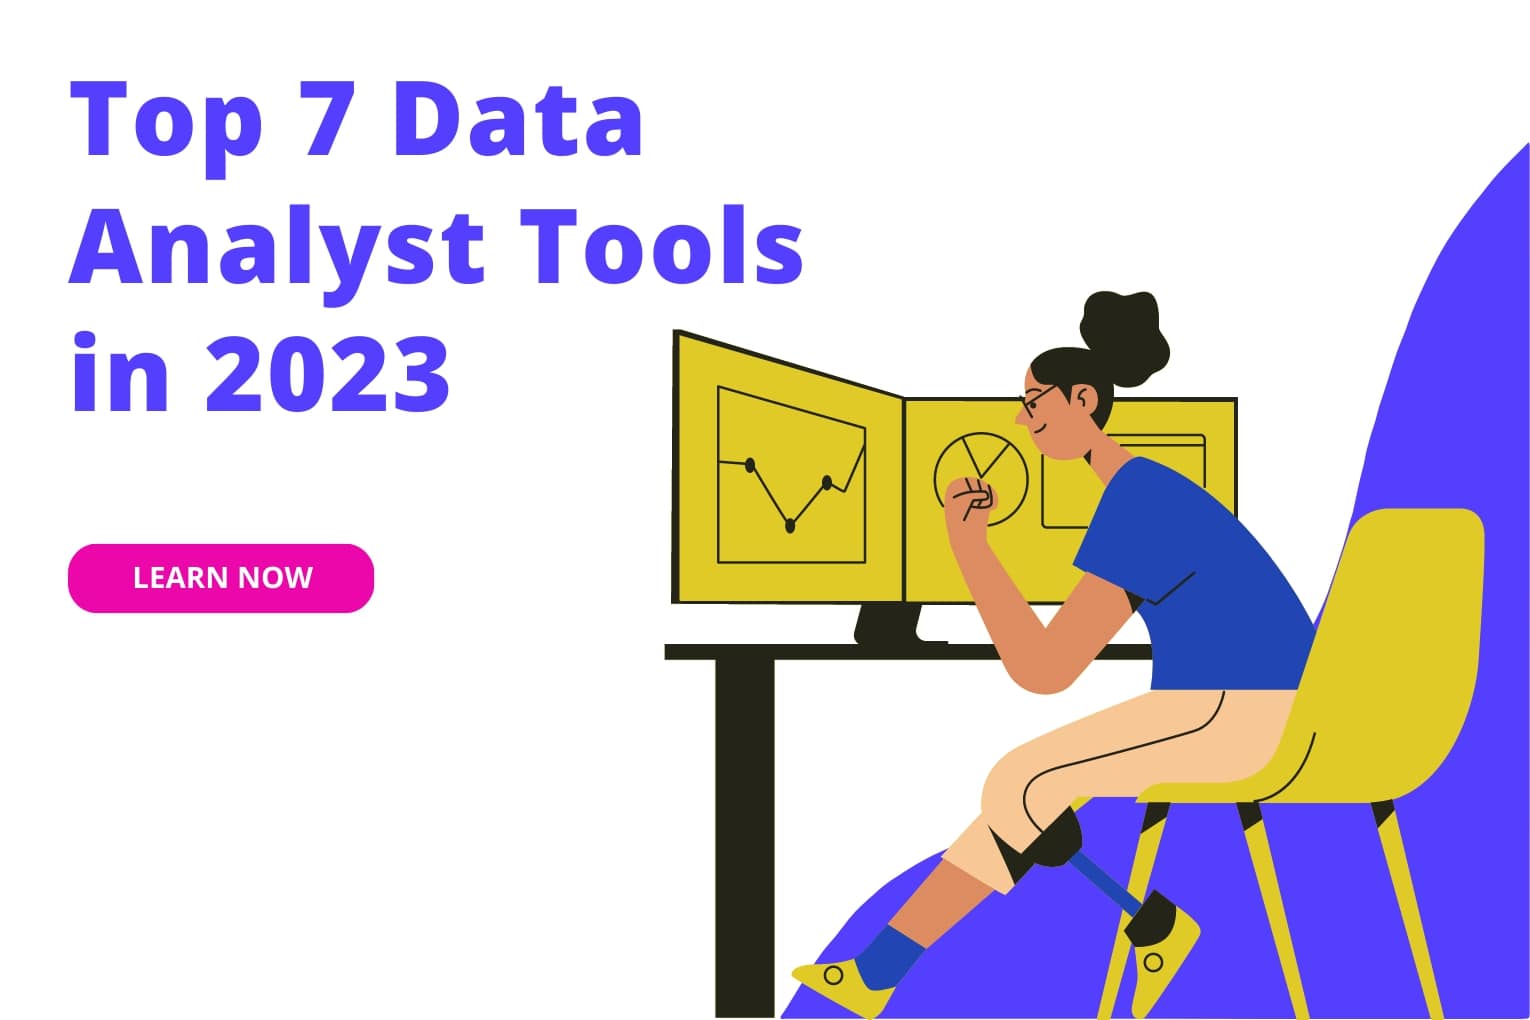 Top 7 Tools For Data Analysis in 2023